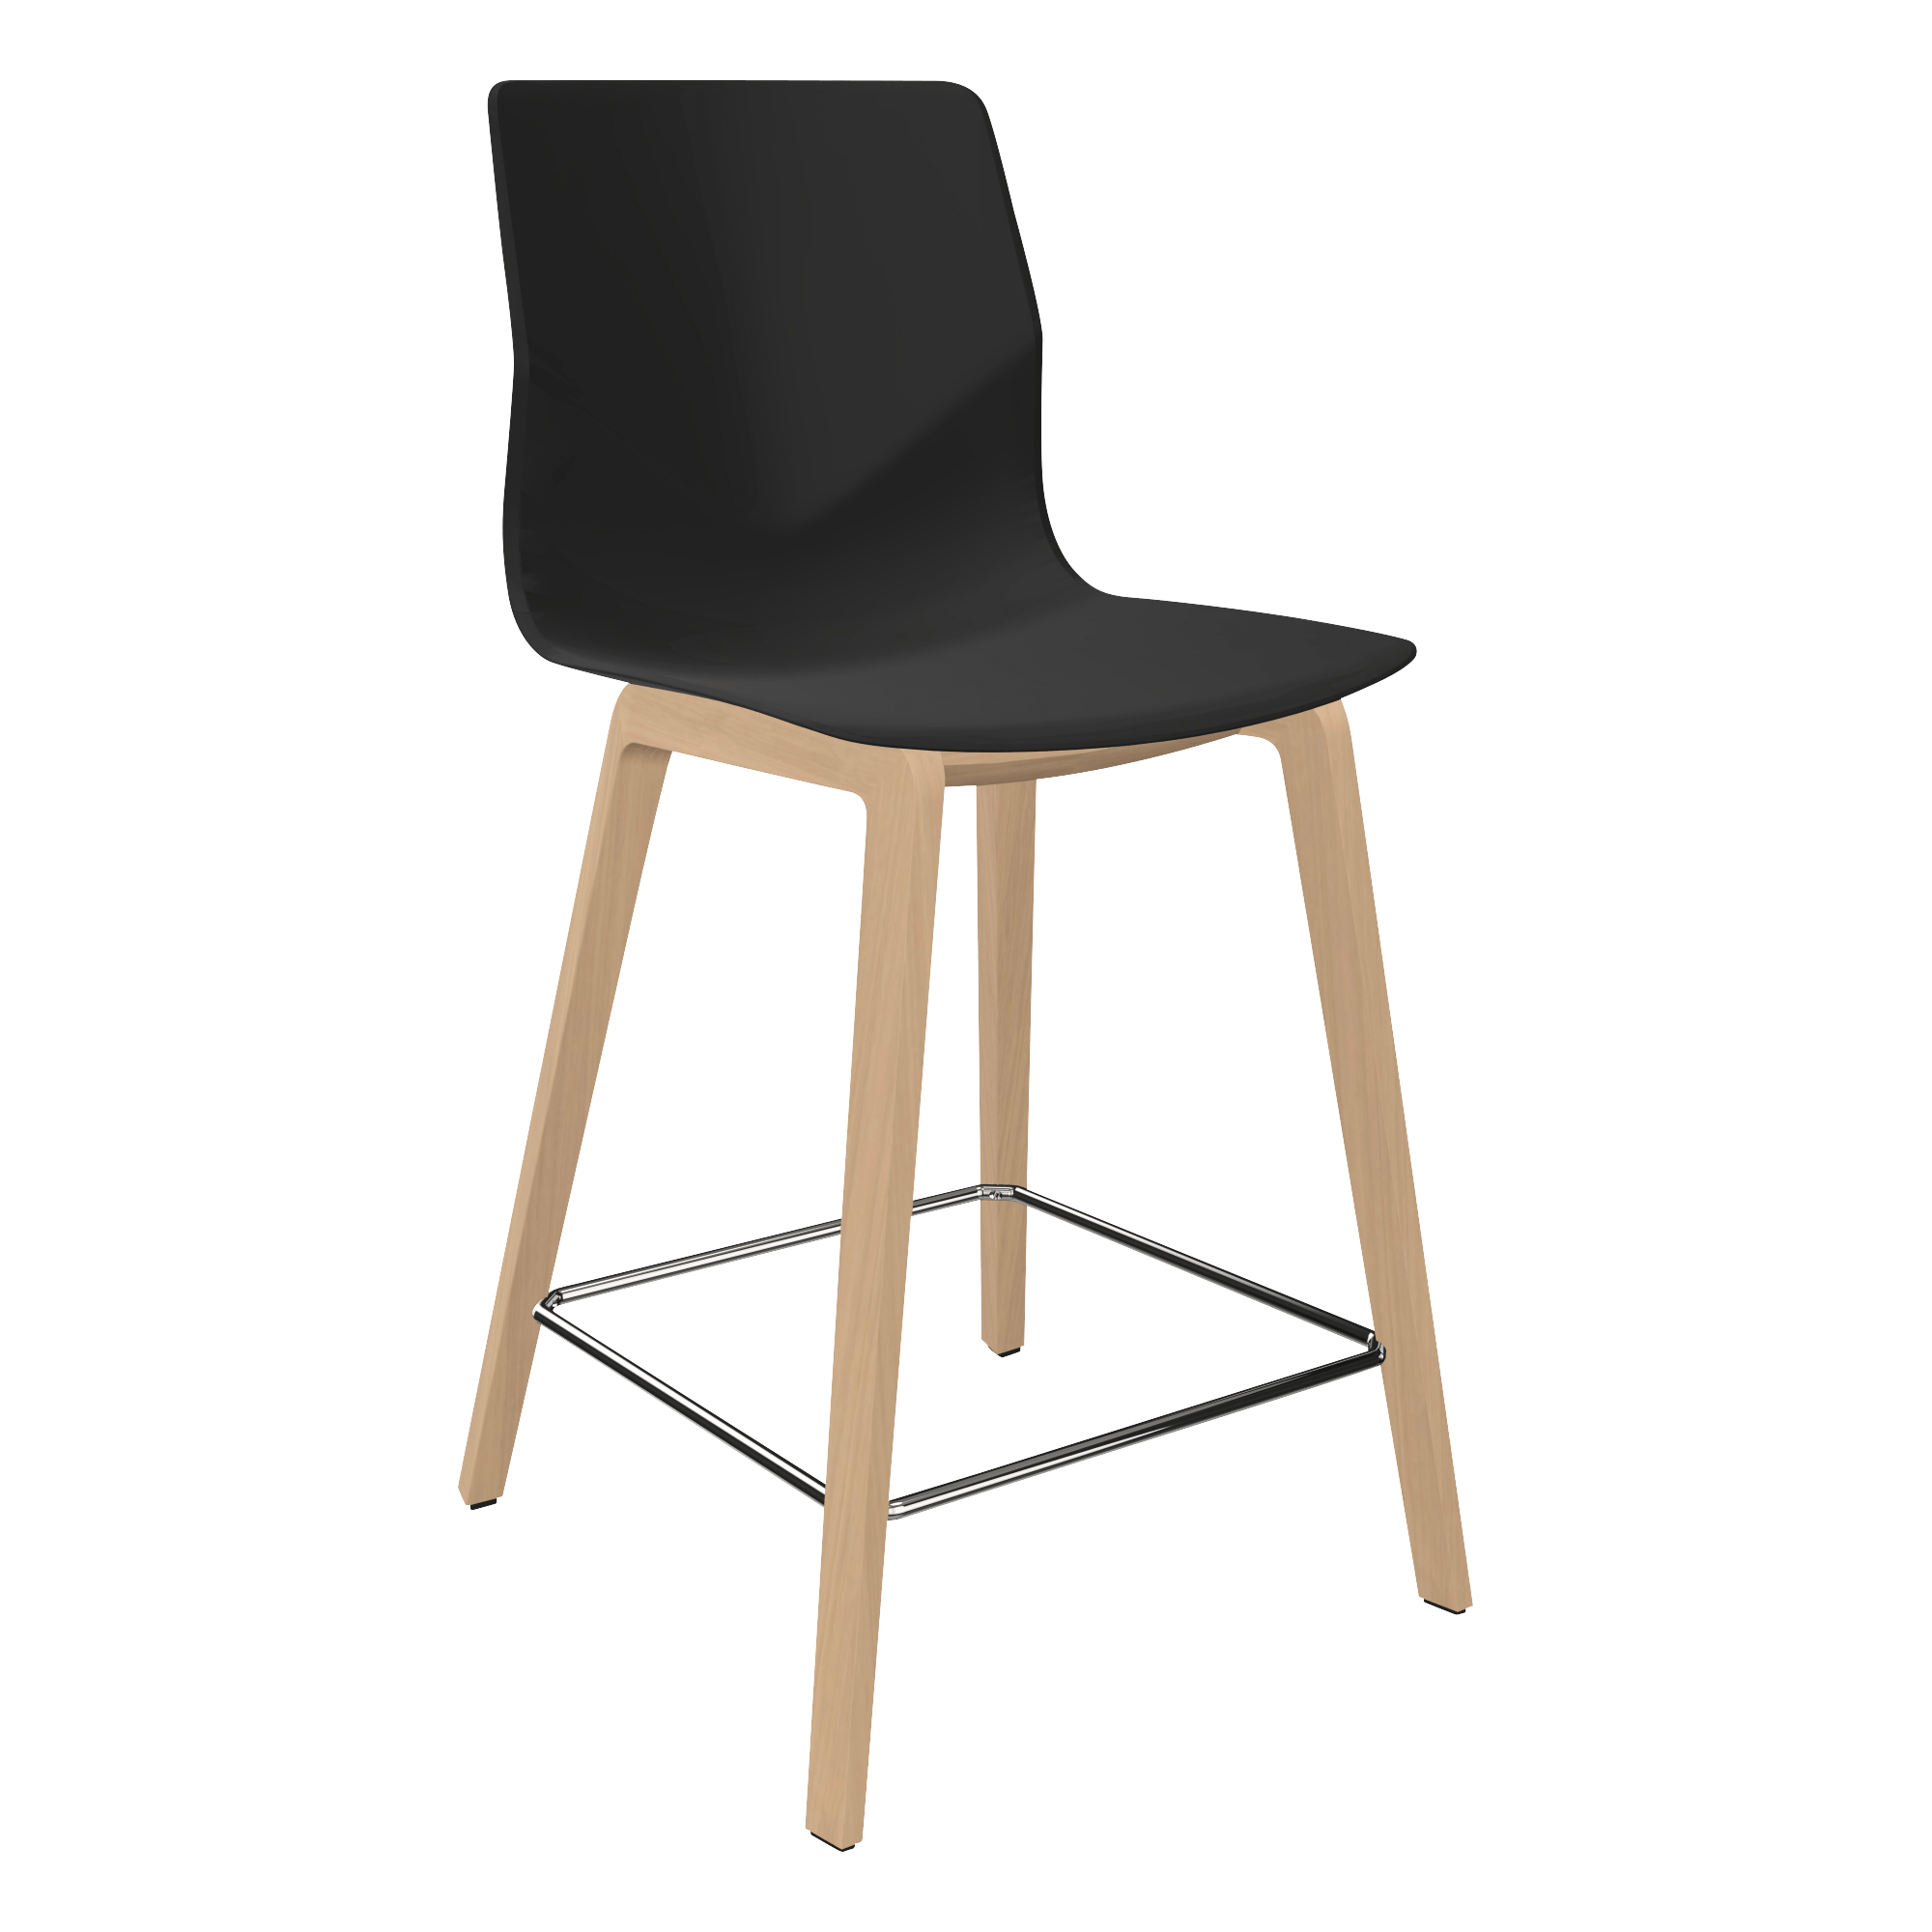 A black mid height counter chair with 4 wooden legs